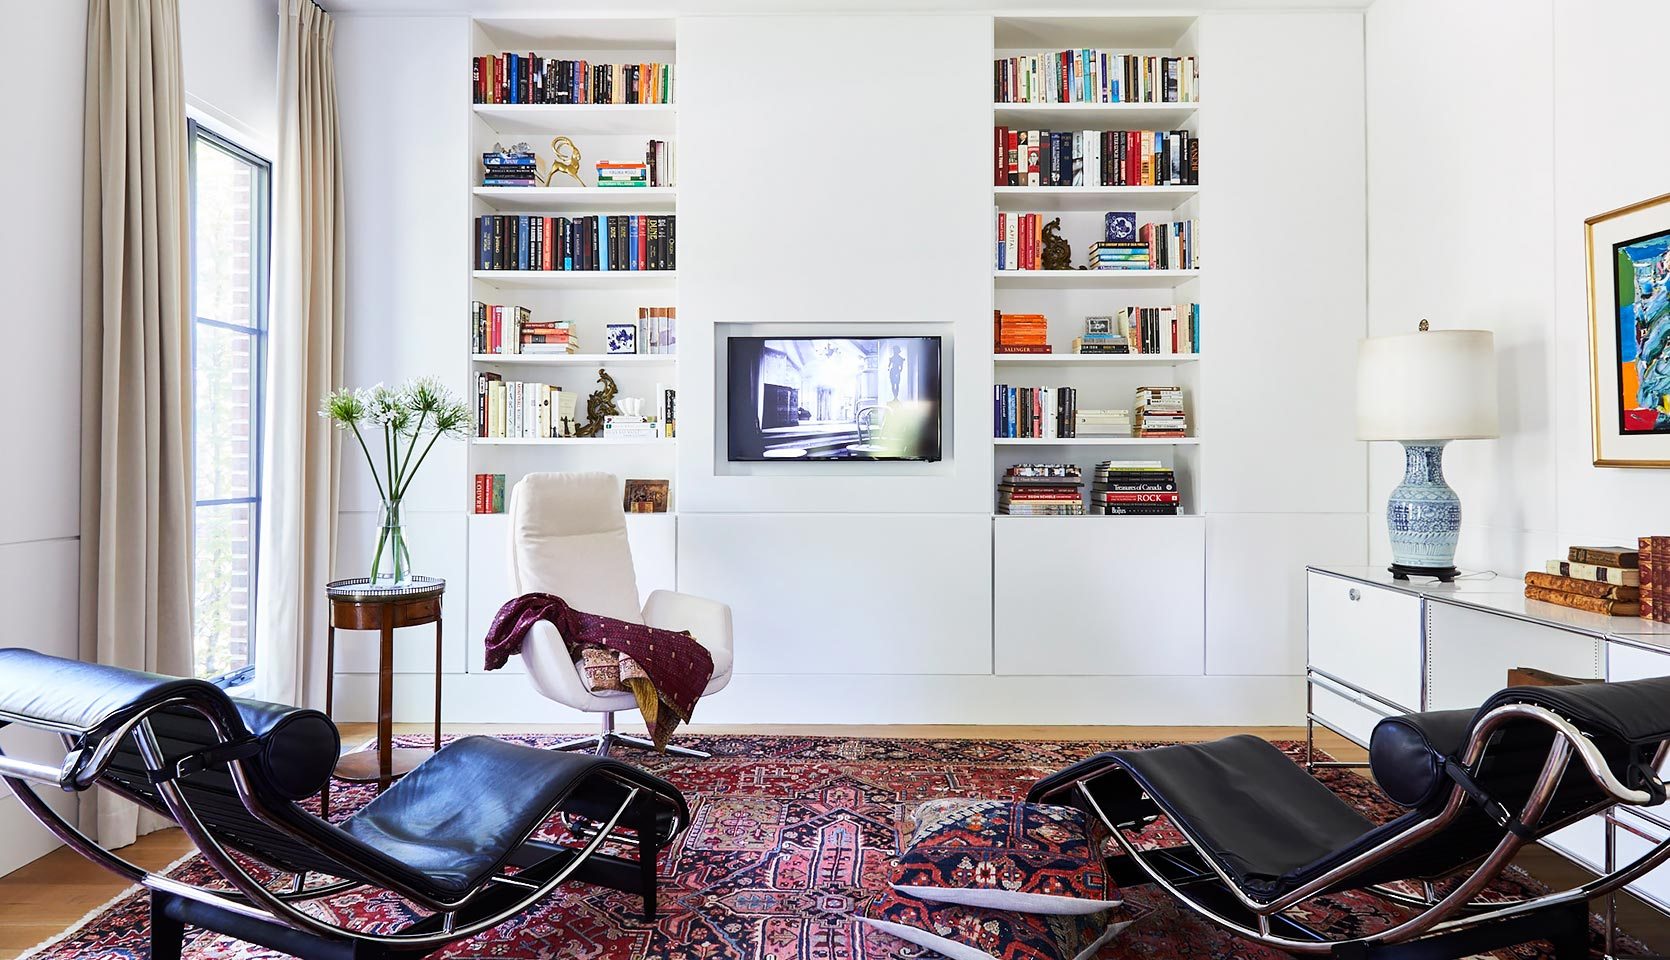 Moore-Park-House-study-with-built-in-bookshelf-on-wall